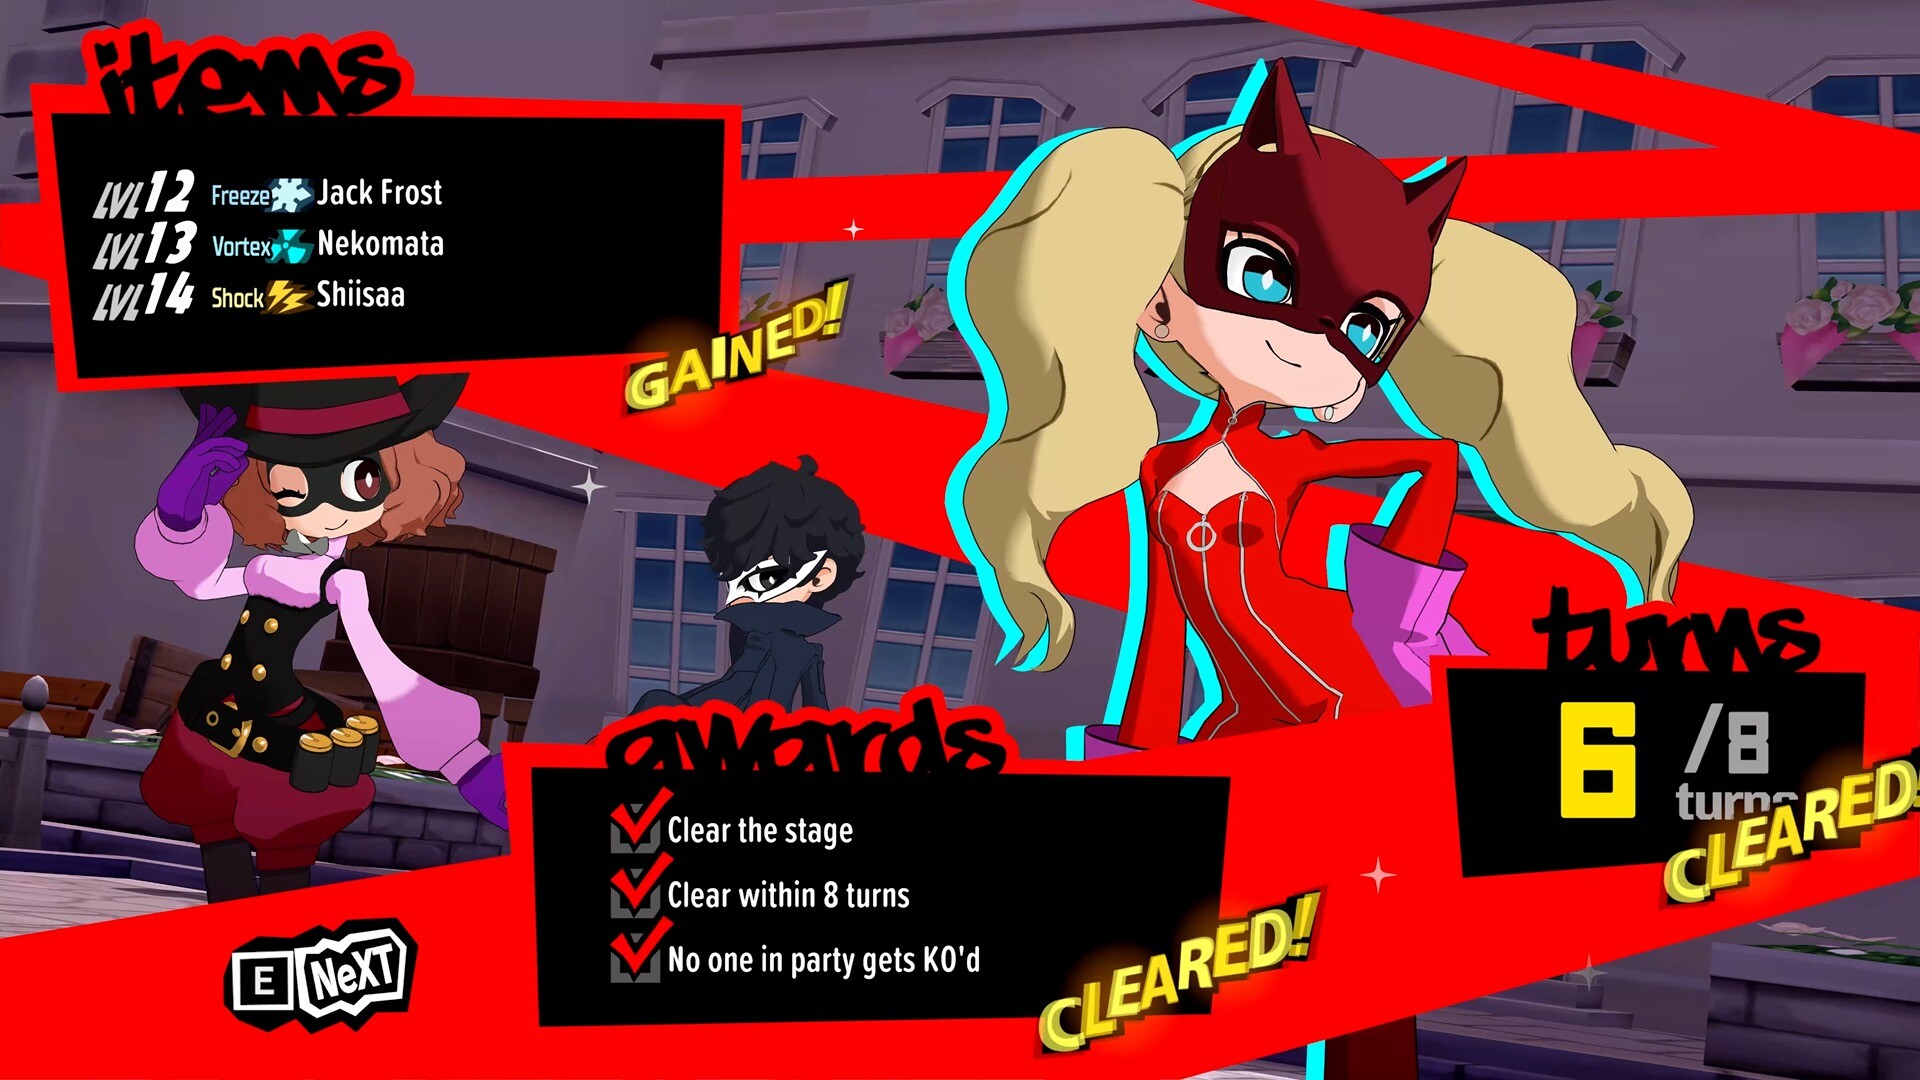 Persona 5 mastered the RPG genre, now Tactica takes on strategy games